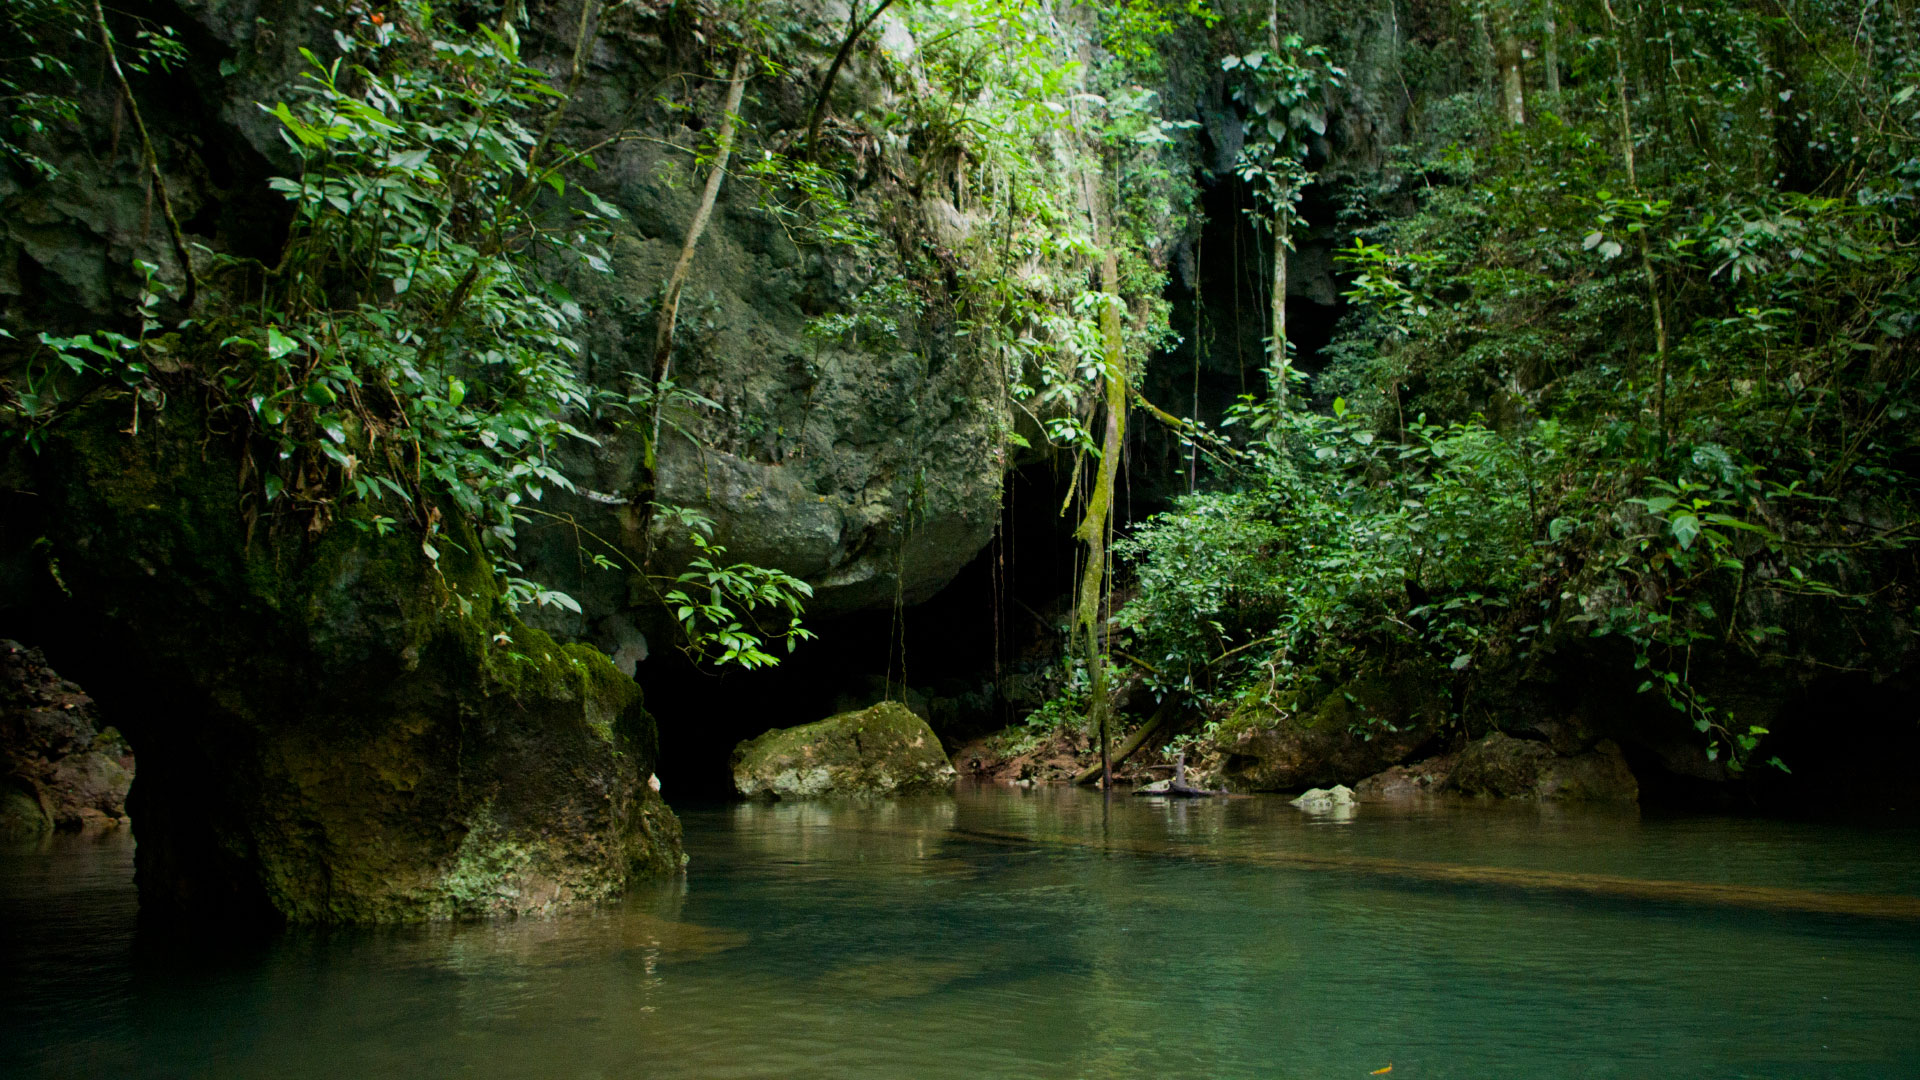 Barton Creek Cave Belize- When you first enter this cave, you might not find it to be anything too special until you notice the skulls. Barton Creek Cave was used by the Maya for ceremonial and burial purposes, and many of their artifacts and remains still lie amongst the cave's natural geological formations.